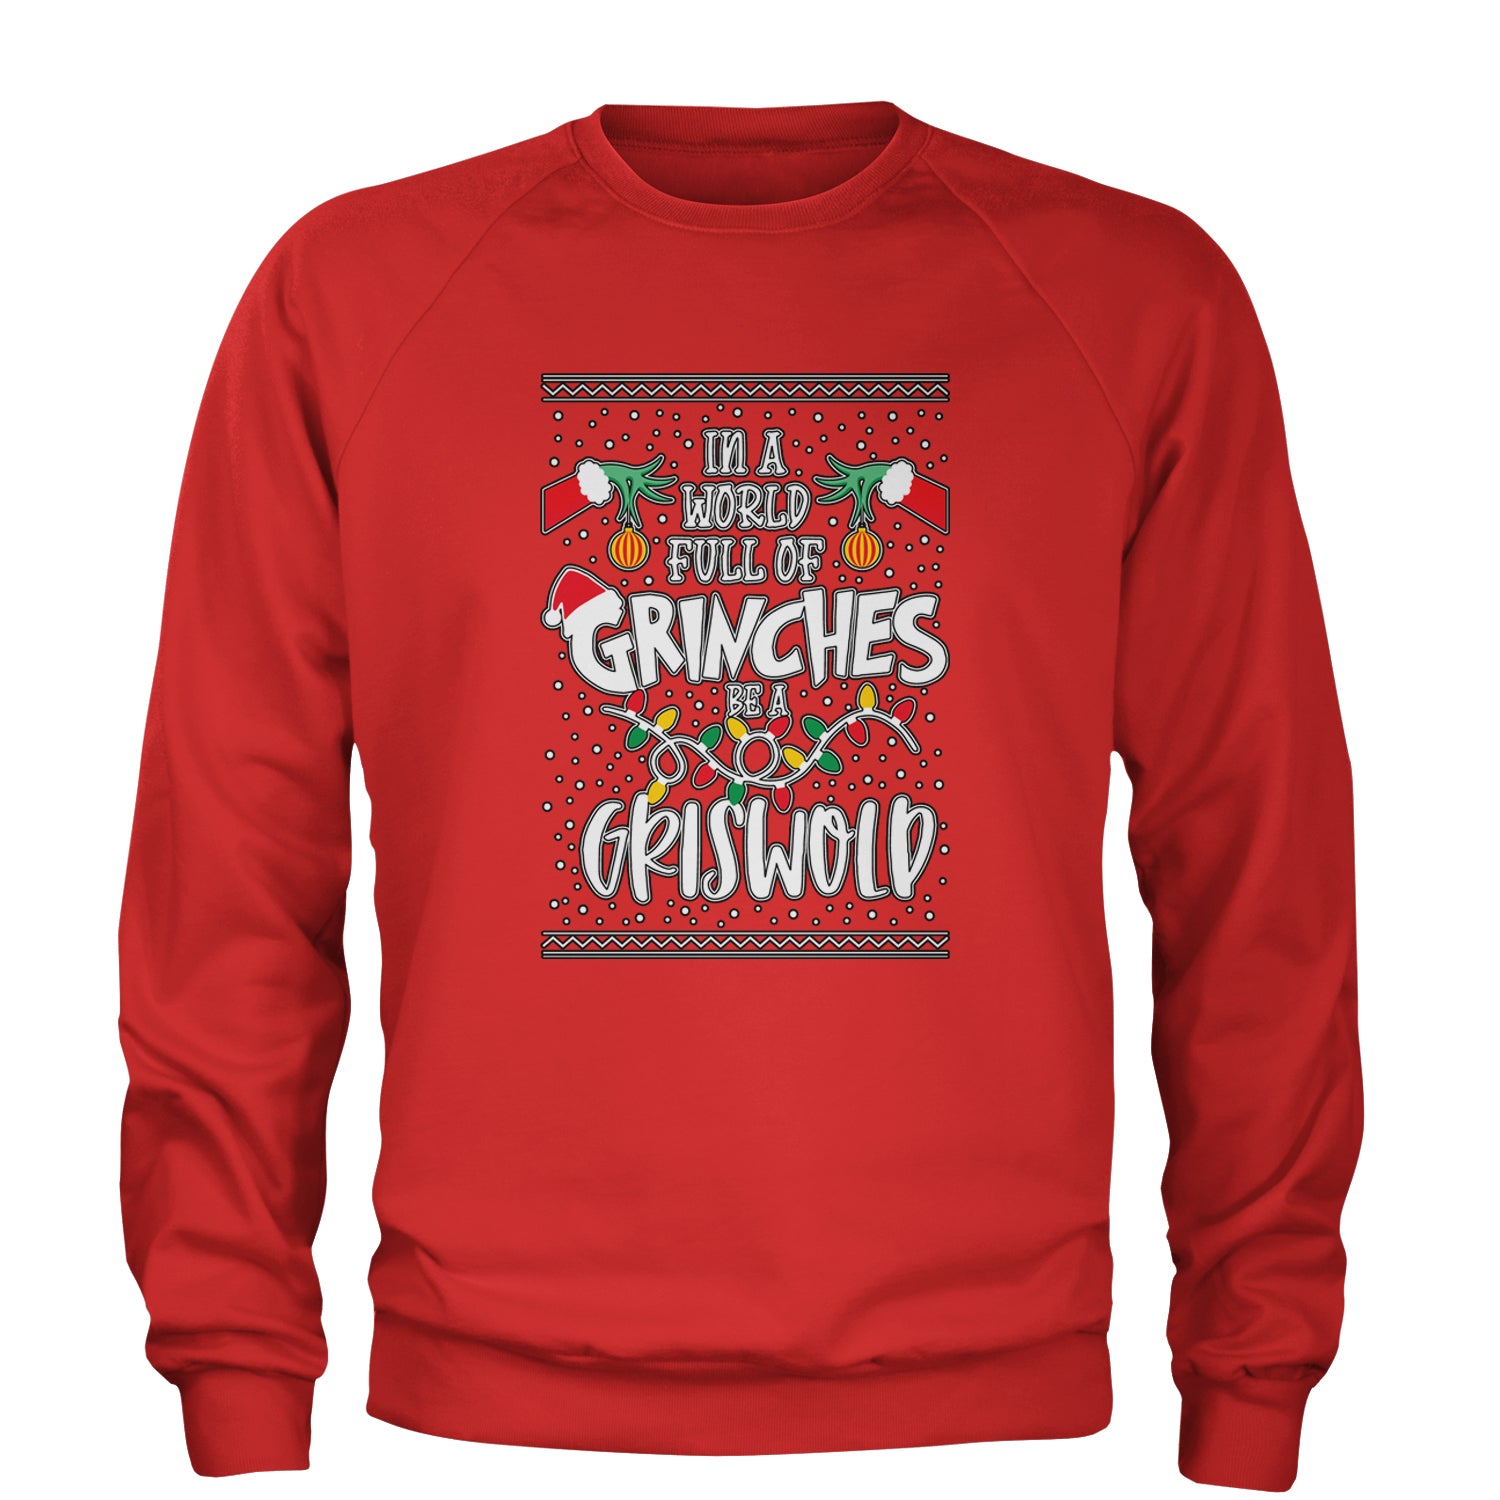 In A World Full Of Grinches, Be A Griswold Adult Crewneck Sweatshirt clark, griswold, lampoon, margot by Expression Tees